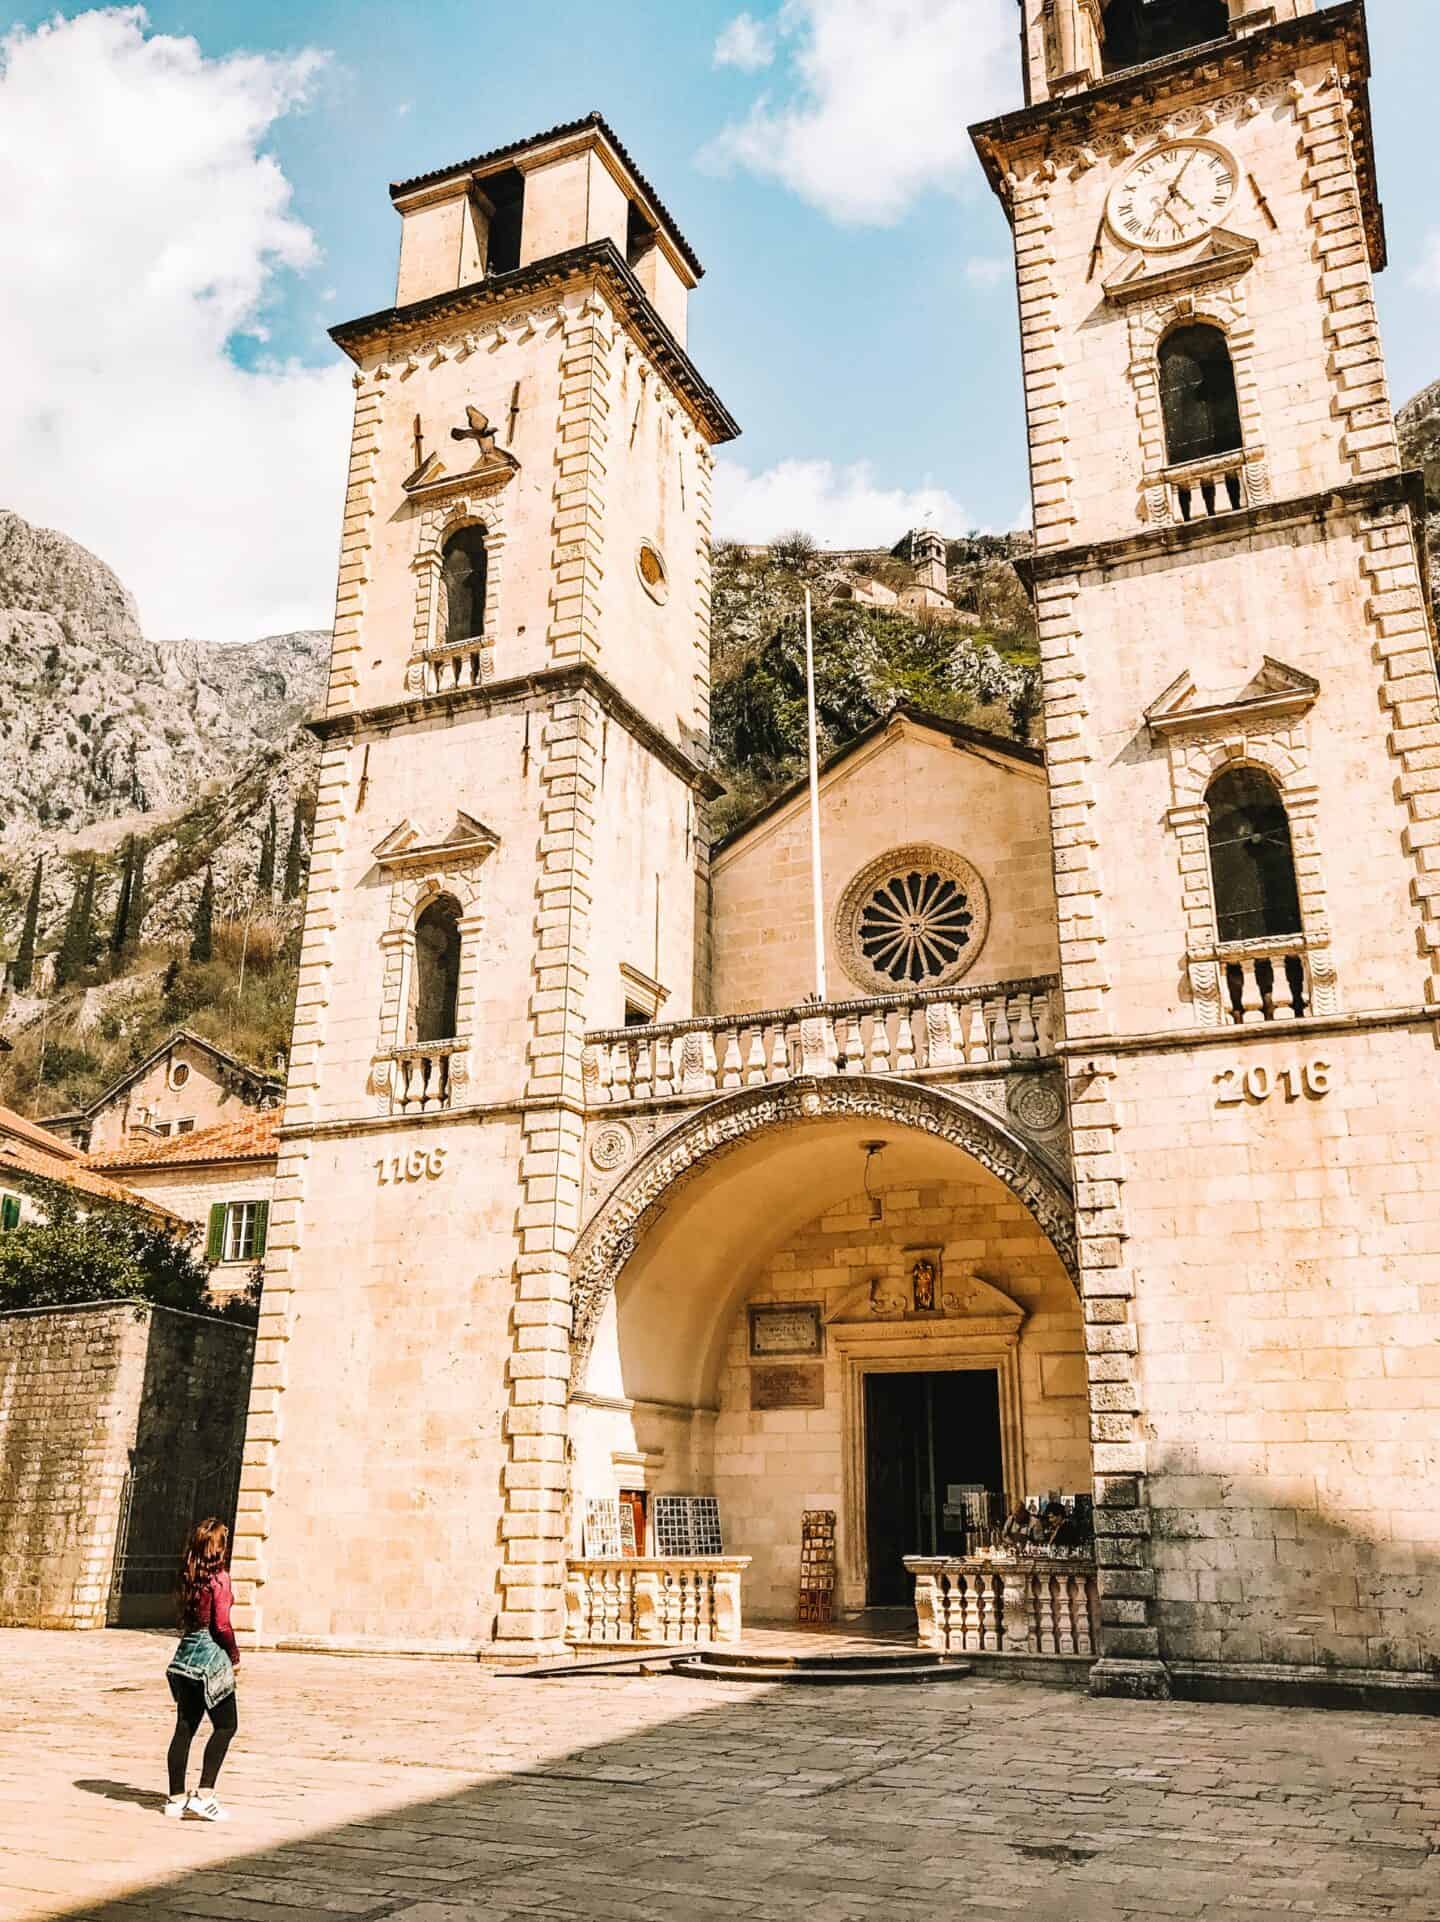 Cathedral of St. Tryphon in Kotor